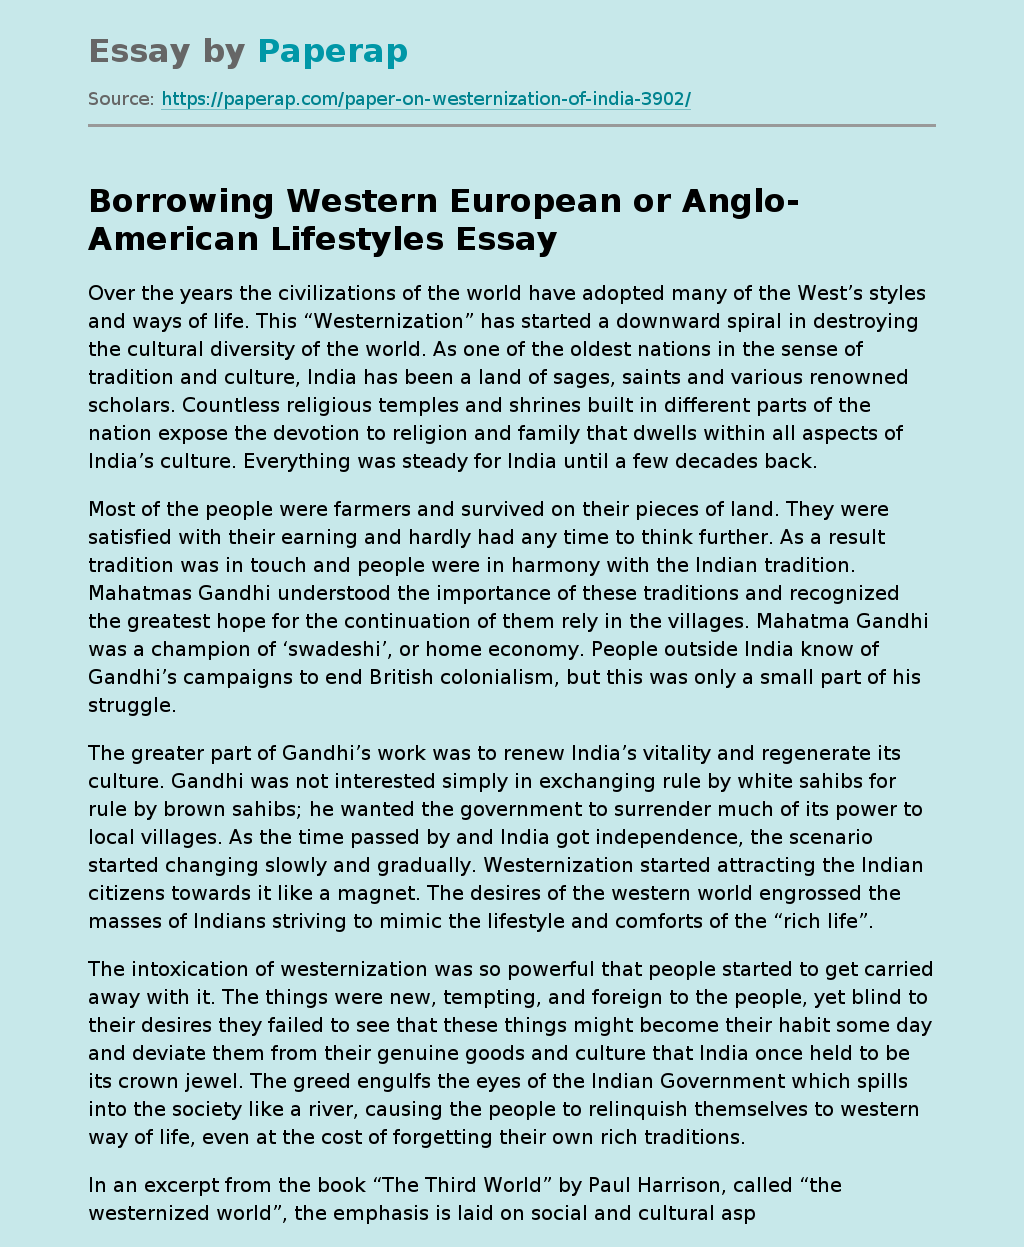 Borrowing Western European or Anglo-American Lifestyles